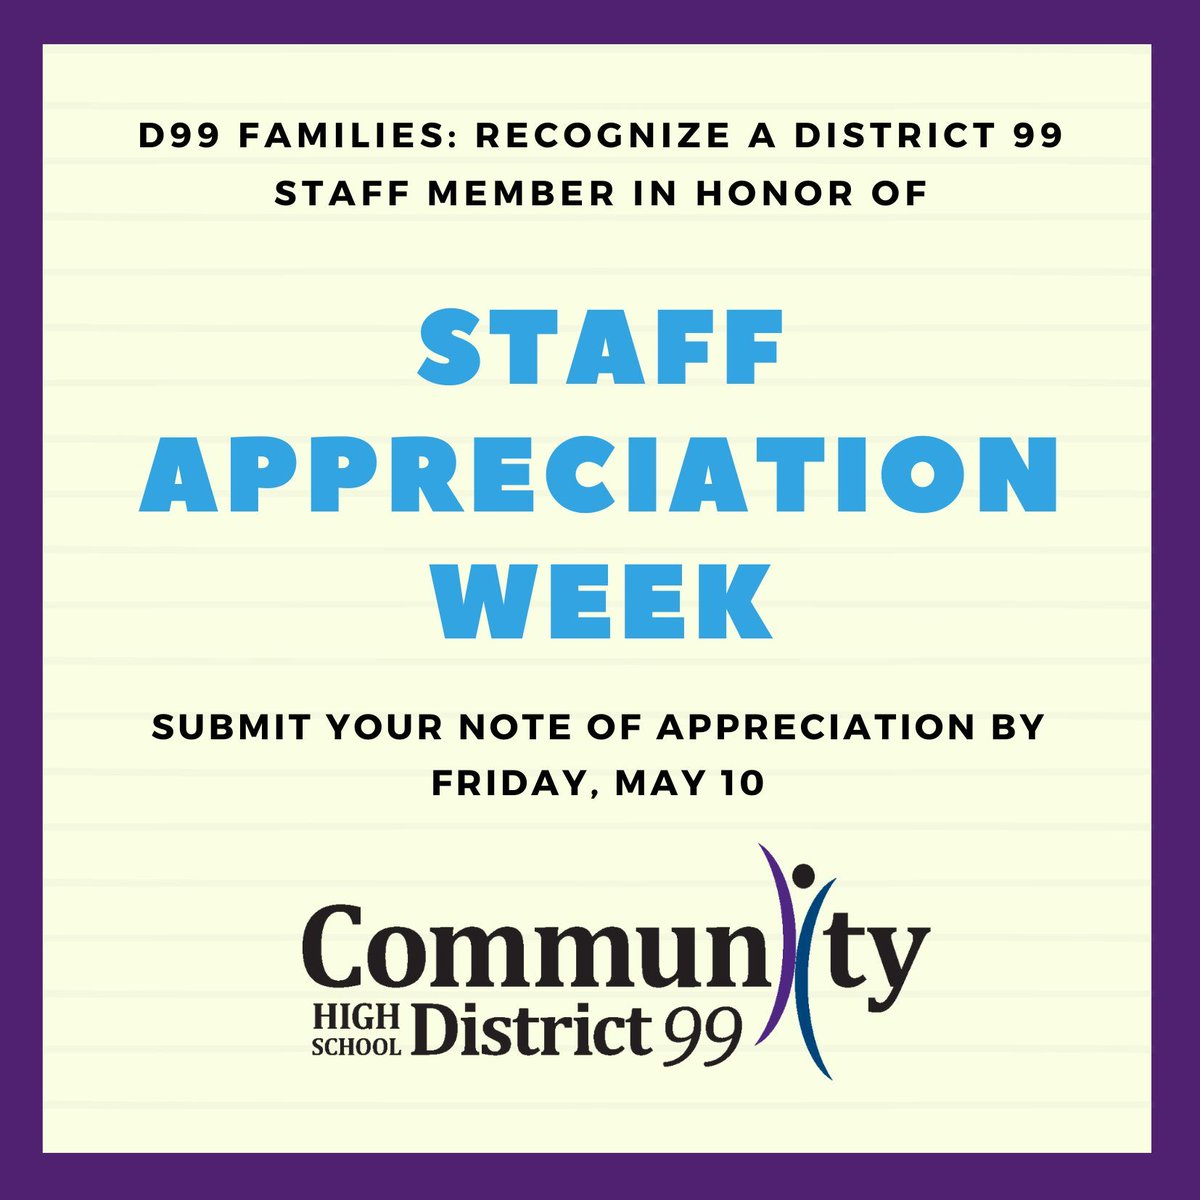 With only two weeks left in the school year, we encourage your family to reflect upon those within District 99 who have made a positive impact on your student’s experience. 

Submit your note of appreciation by this Friday, May 10.

buff.ly/3TKx6Gj 

#99learns #WeAreDGN